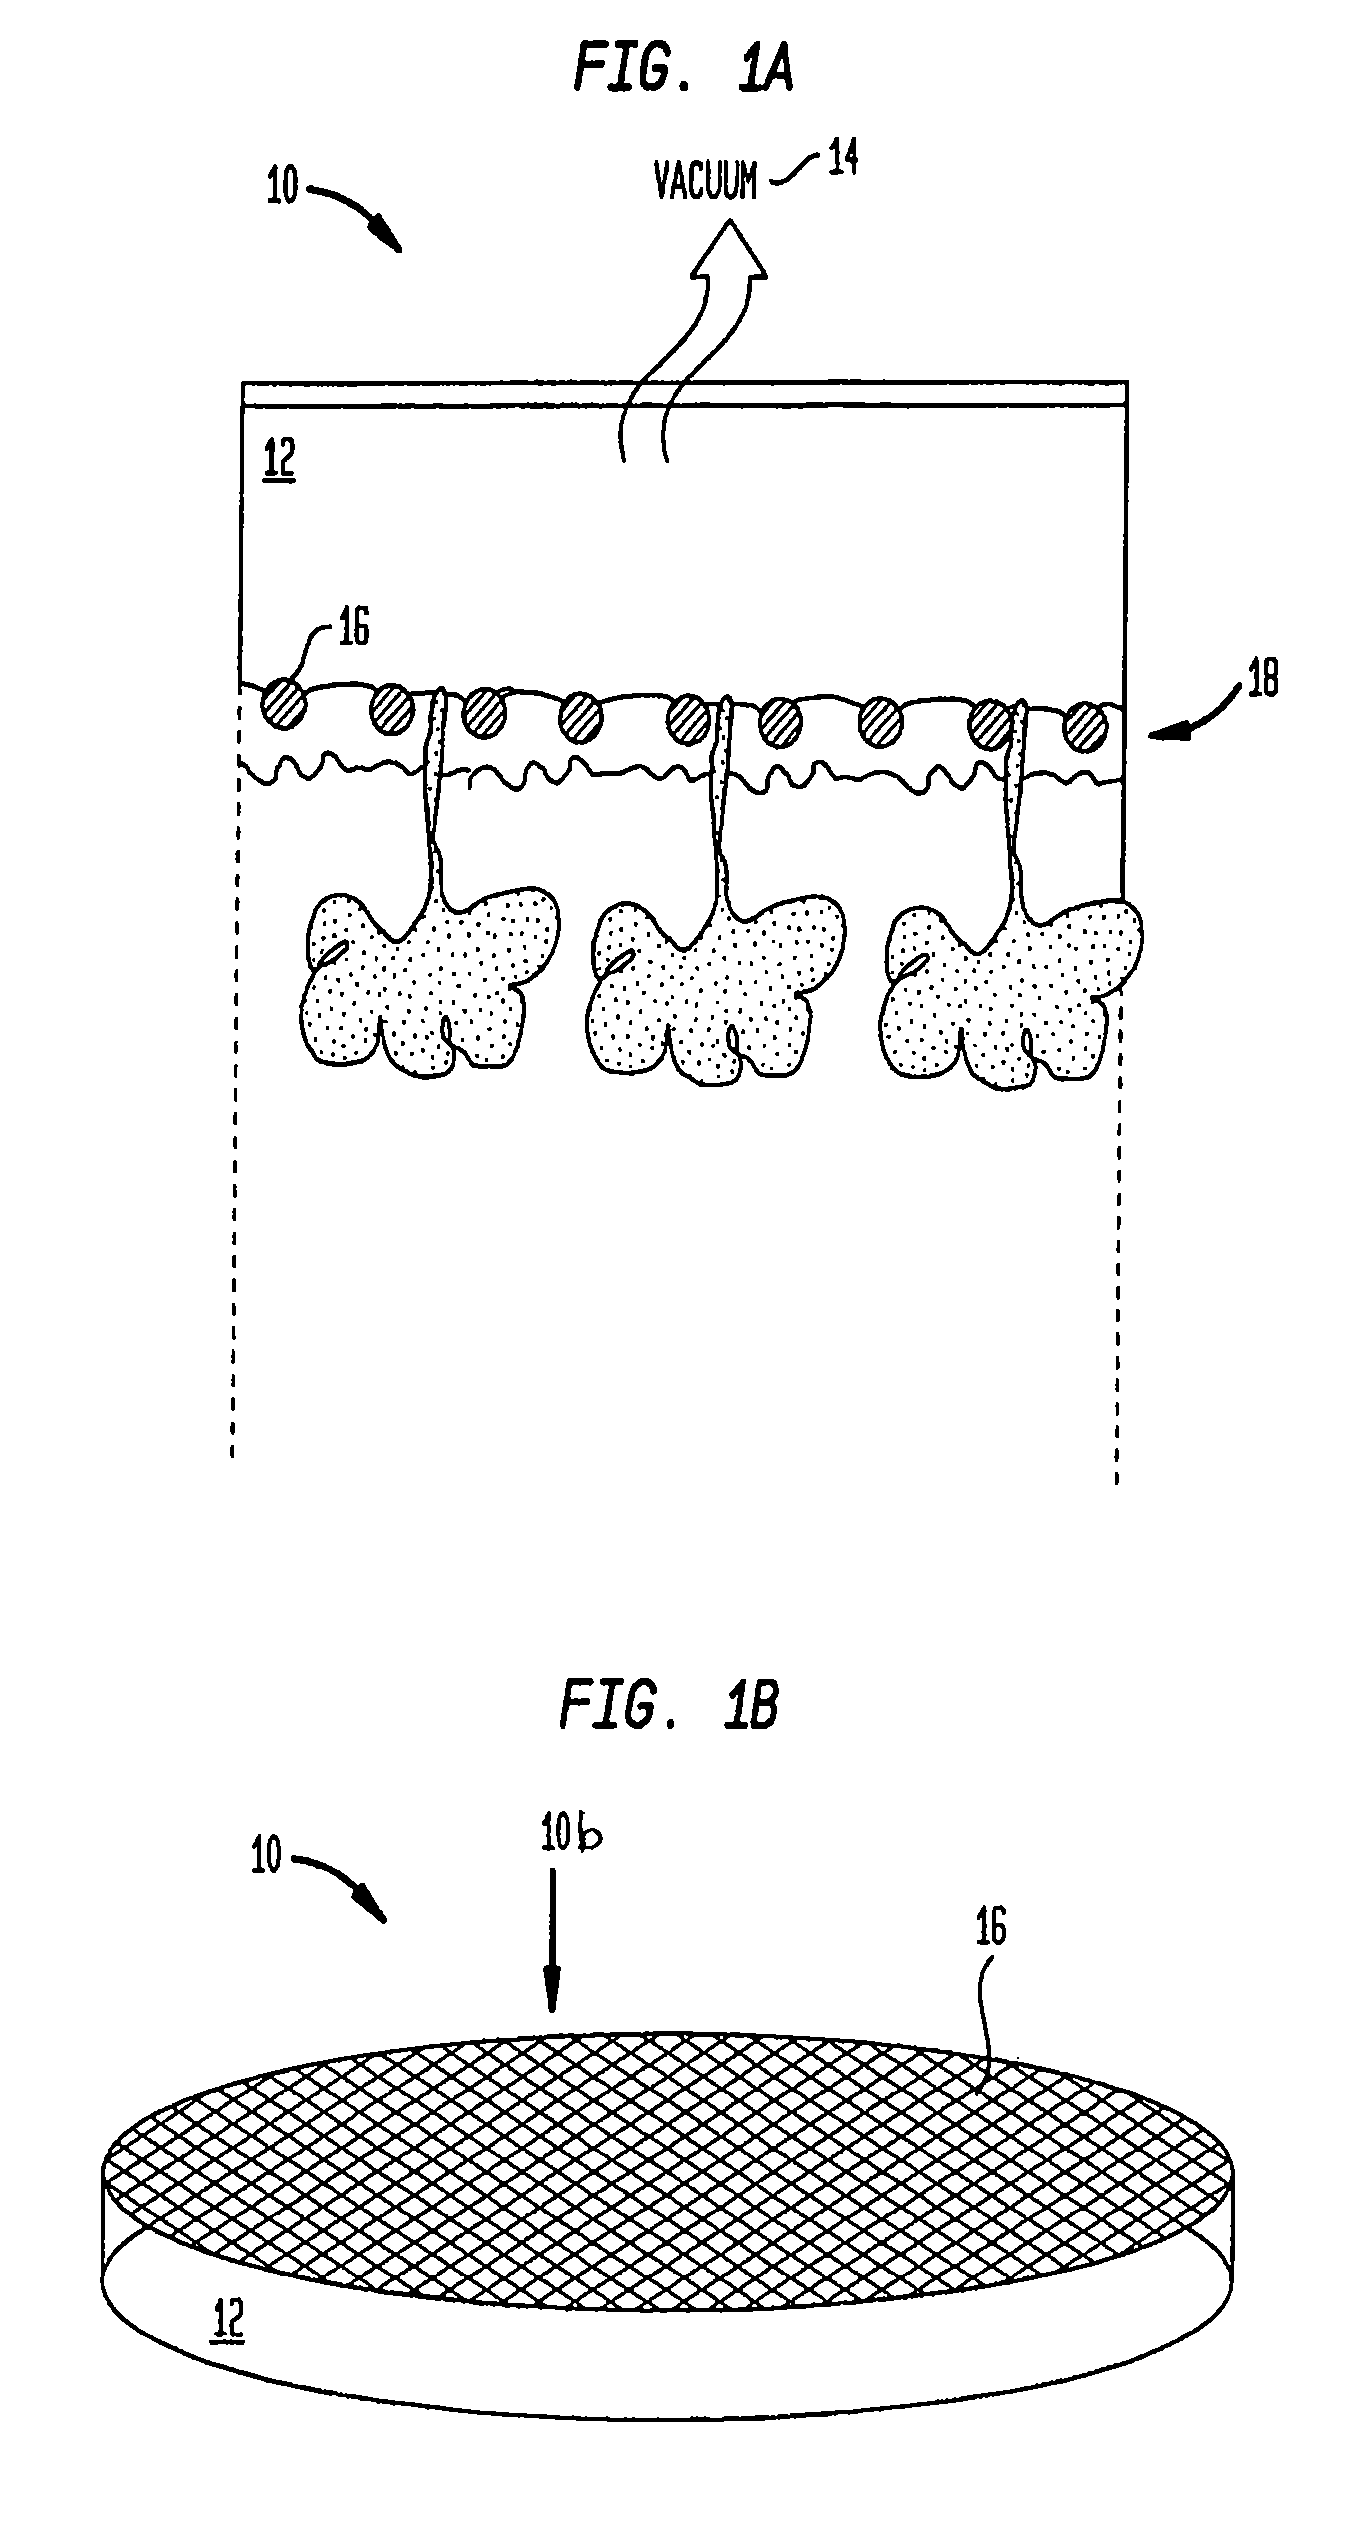 Methods and devices for epithelial protection during photodynamic therapy